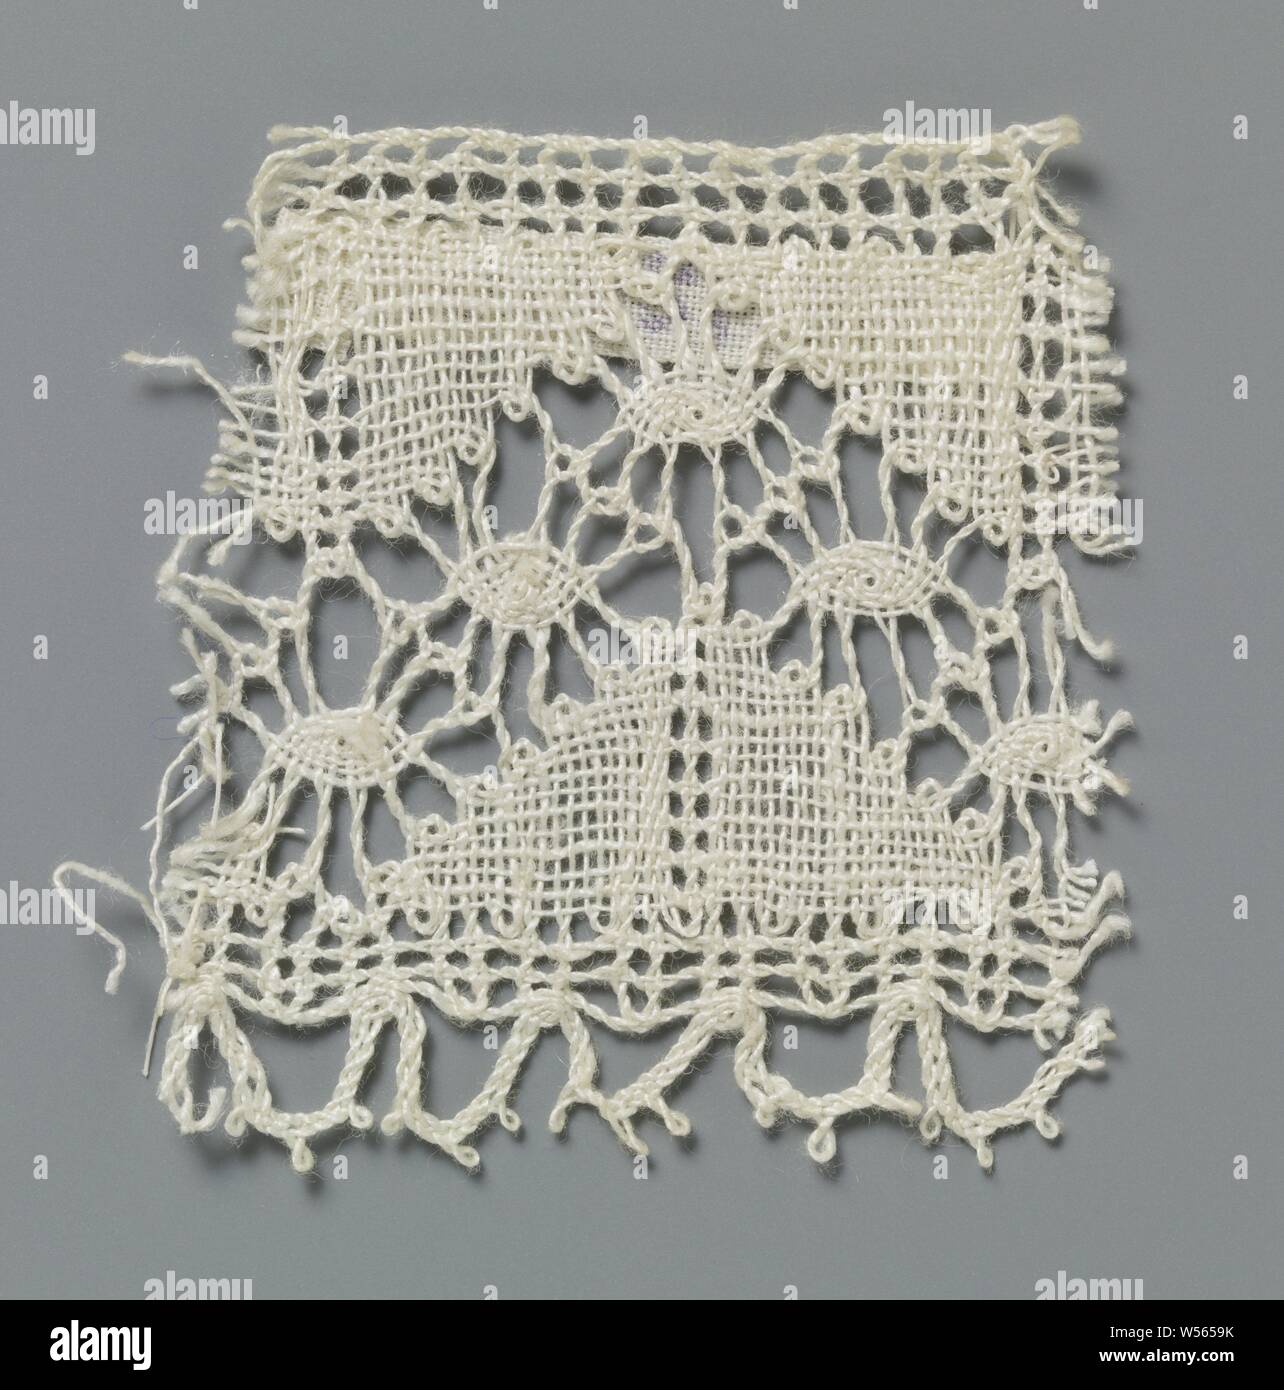 Strip of spool lace with pointed oval in reverse V-shaped band, Natural spool of lace strip, lace. The pattern consists of an openwork and inverted v-shaped band, in which pointed oval shapes are made between crossing pairs. The triangular fields that form along the top and bottom of the zigzag band are made in linen. The top of the strip is finished straight. The bottom is finished with bows, made with a continuous braid that has three picots per bow., anonymous, Buckingham, c. 1800 - c. 1899, cotton (textile), torchon lace, l 4 cm × w 5 cm Stock Photo